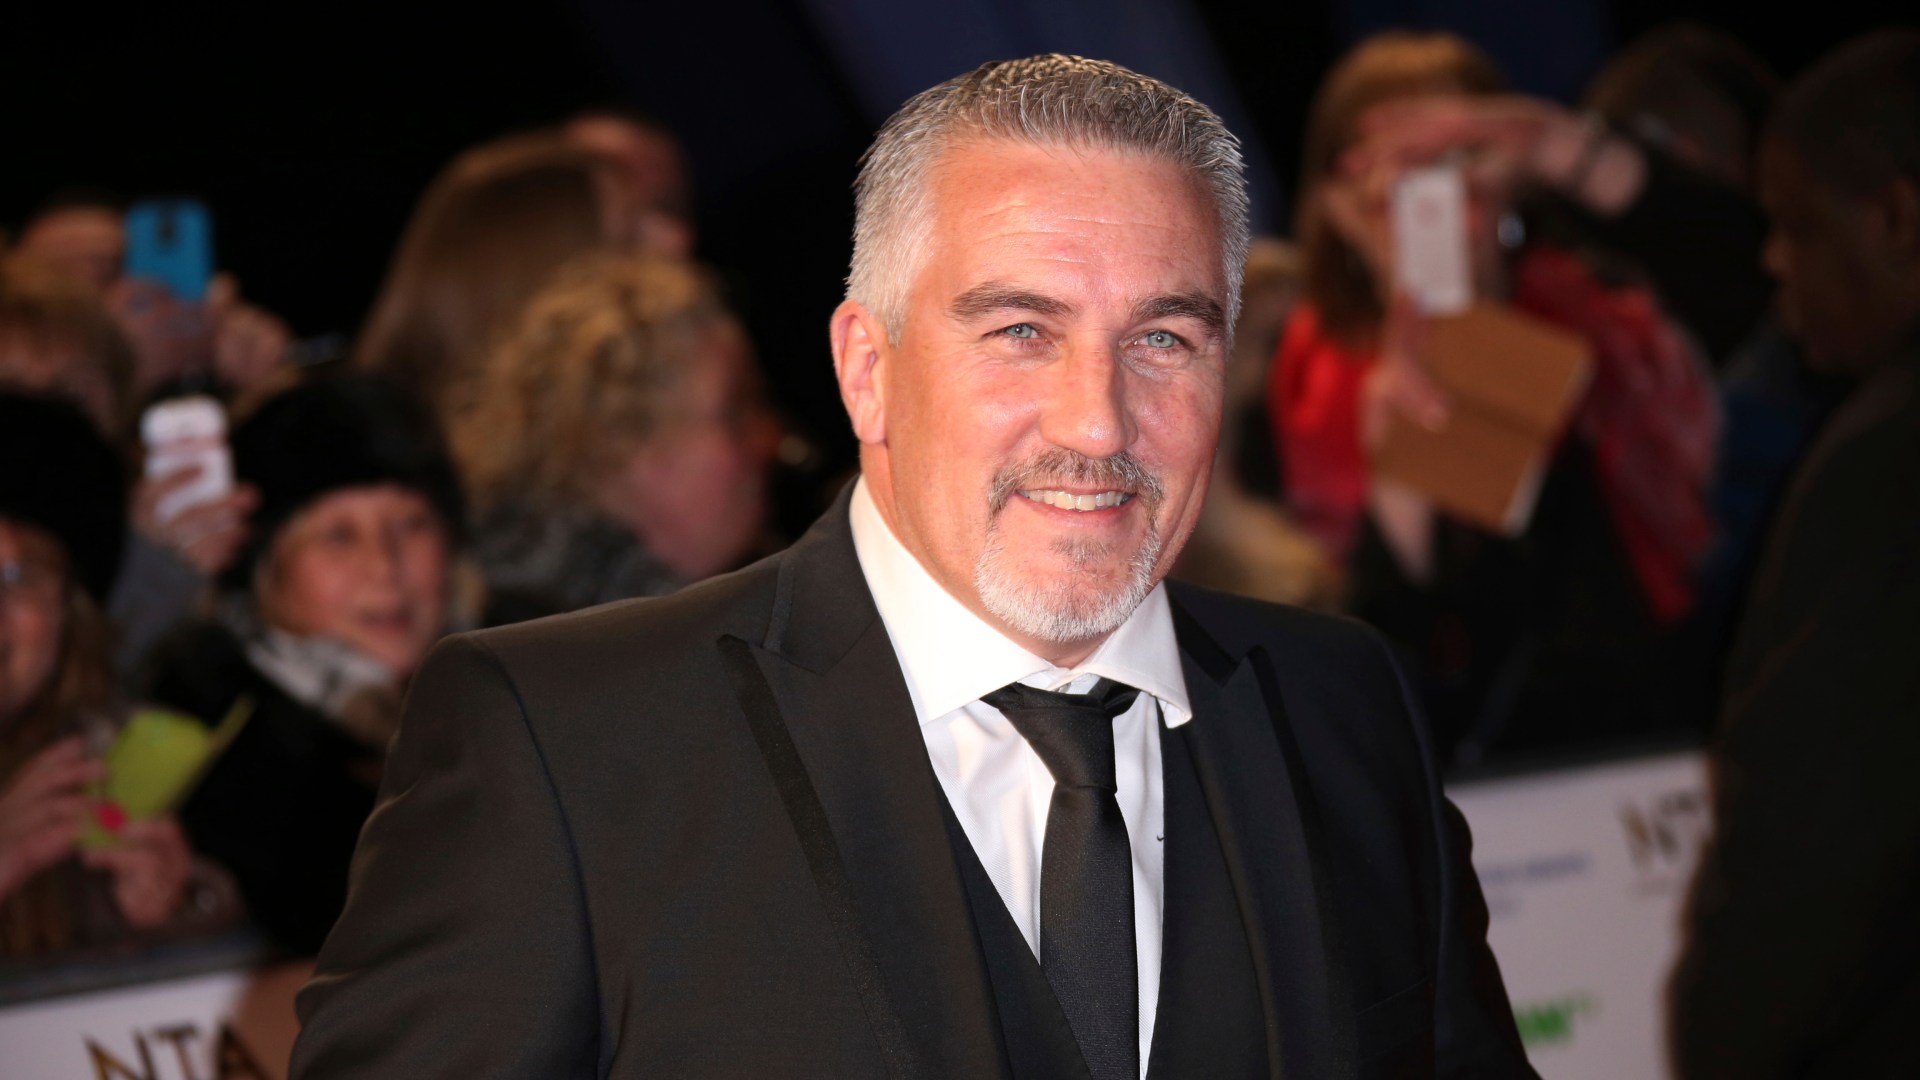 Paul Hollywood Secures Lucrative Deal as New Face of Iconic Brand Amid Bake Off Shake-Up